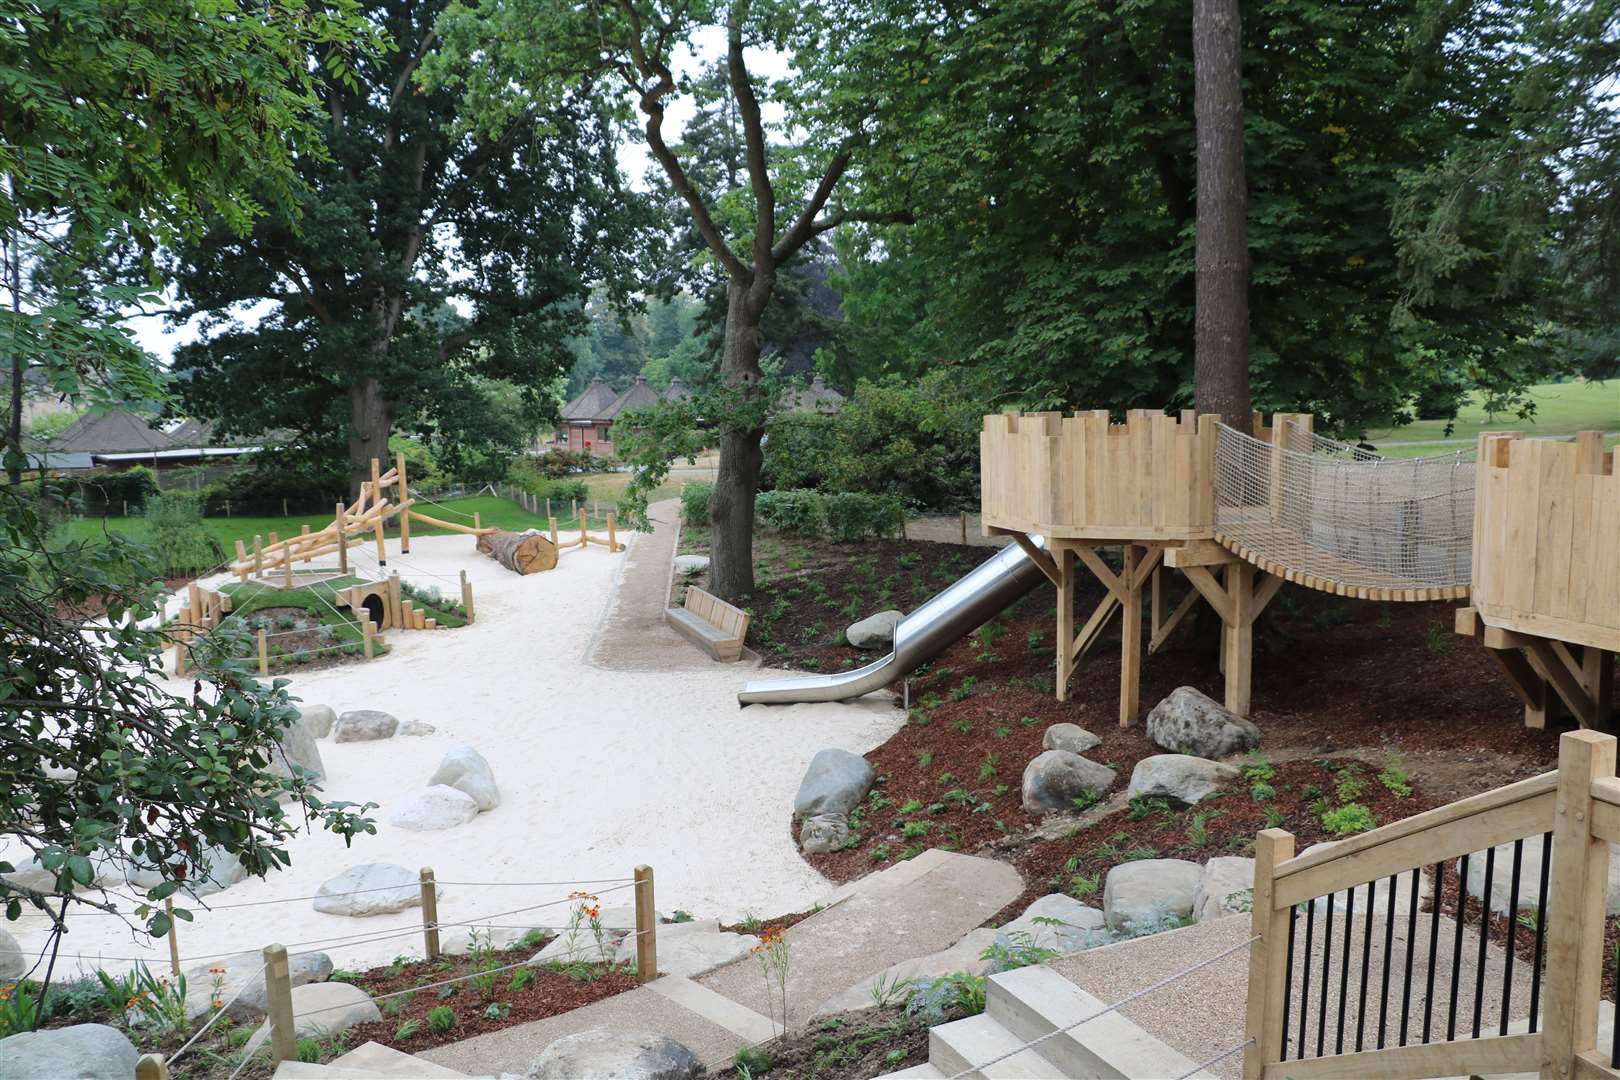 The natural play area for under sevens will open from July 4